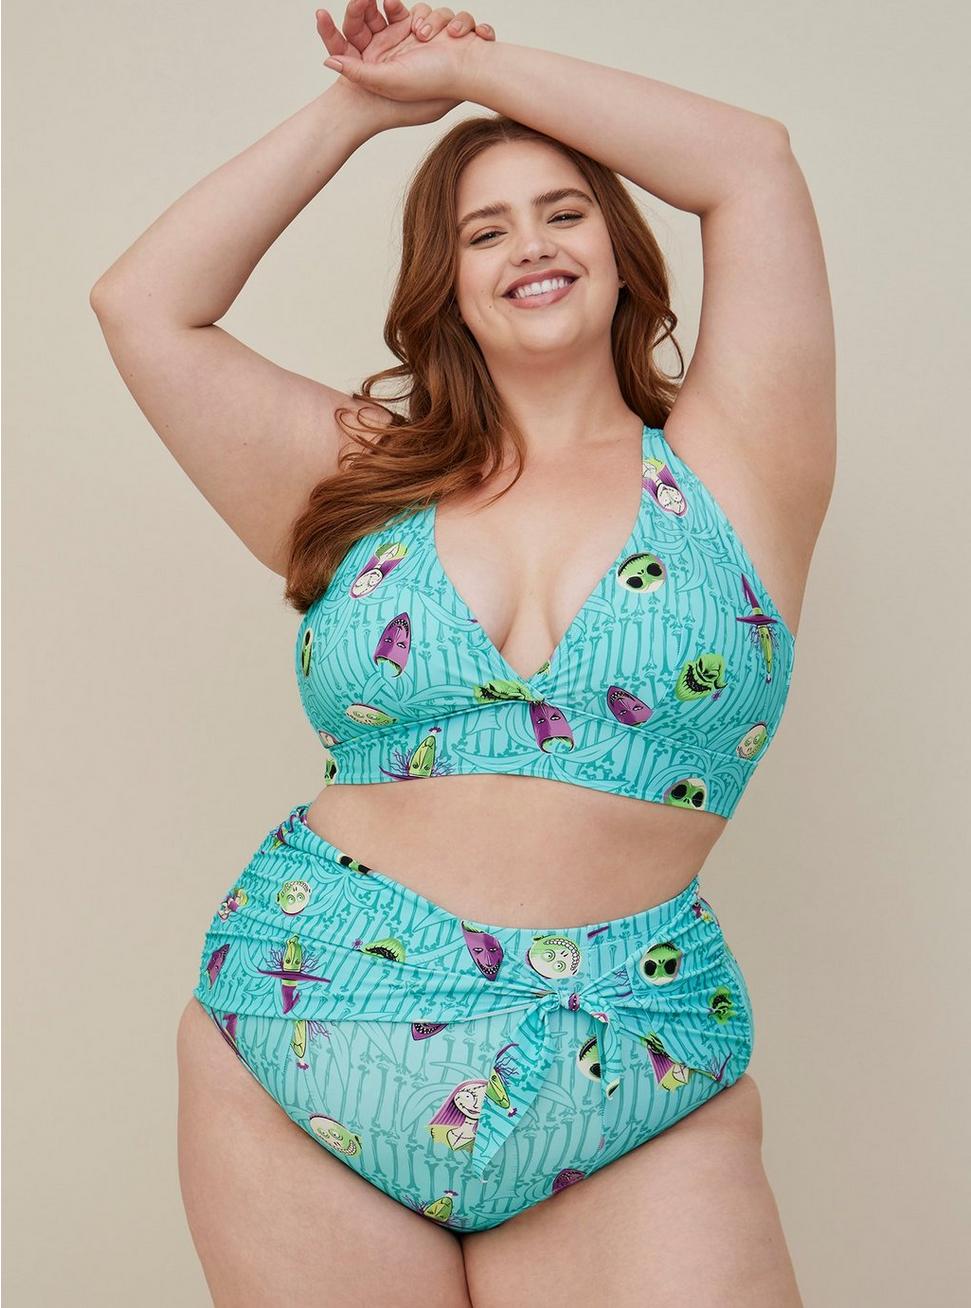 Plus Size Disney The Nightmare Before Christmas High Waisted Tie Front Swim Bottoms - Aqua Blue, MULTI COLOR, hi-res